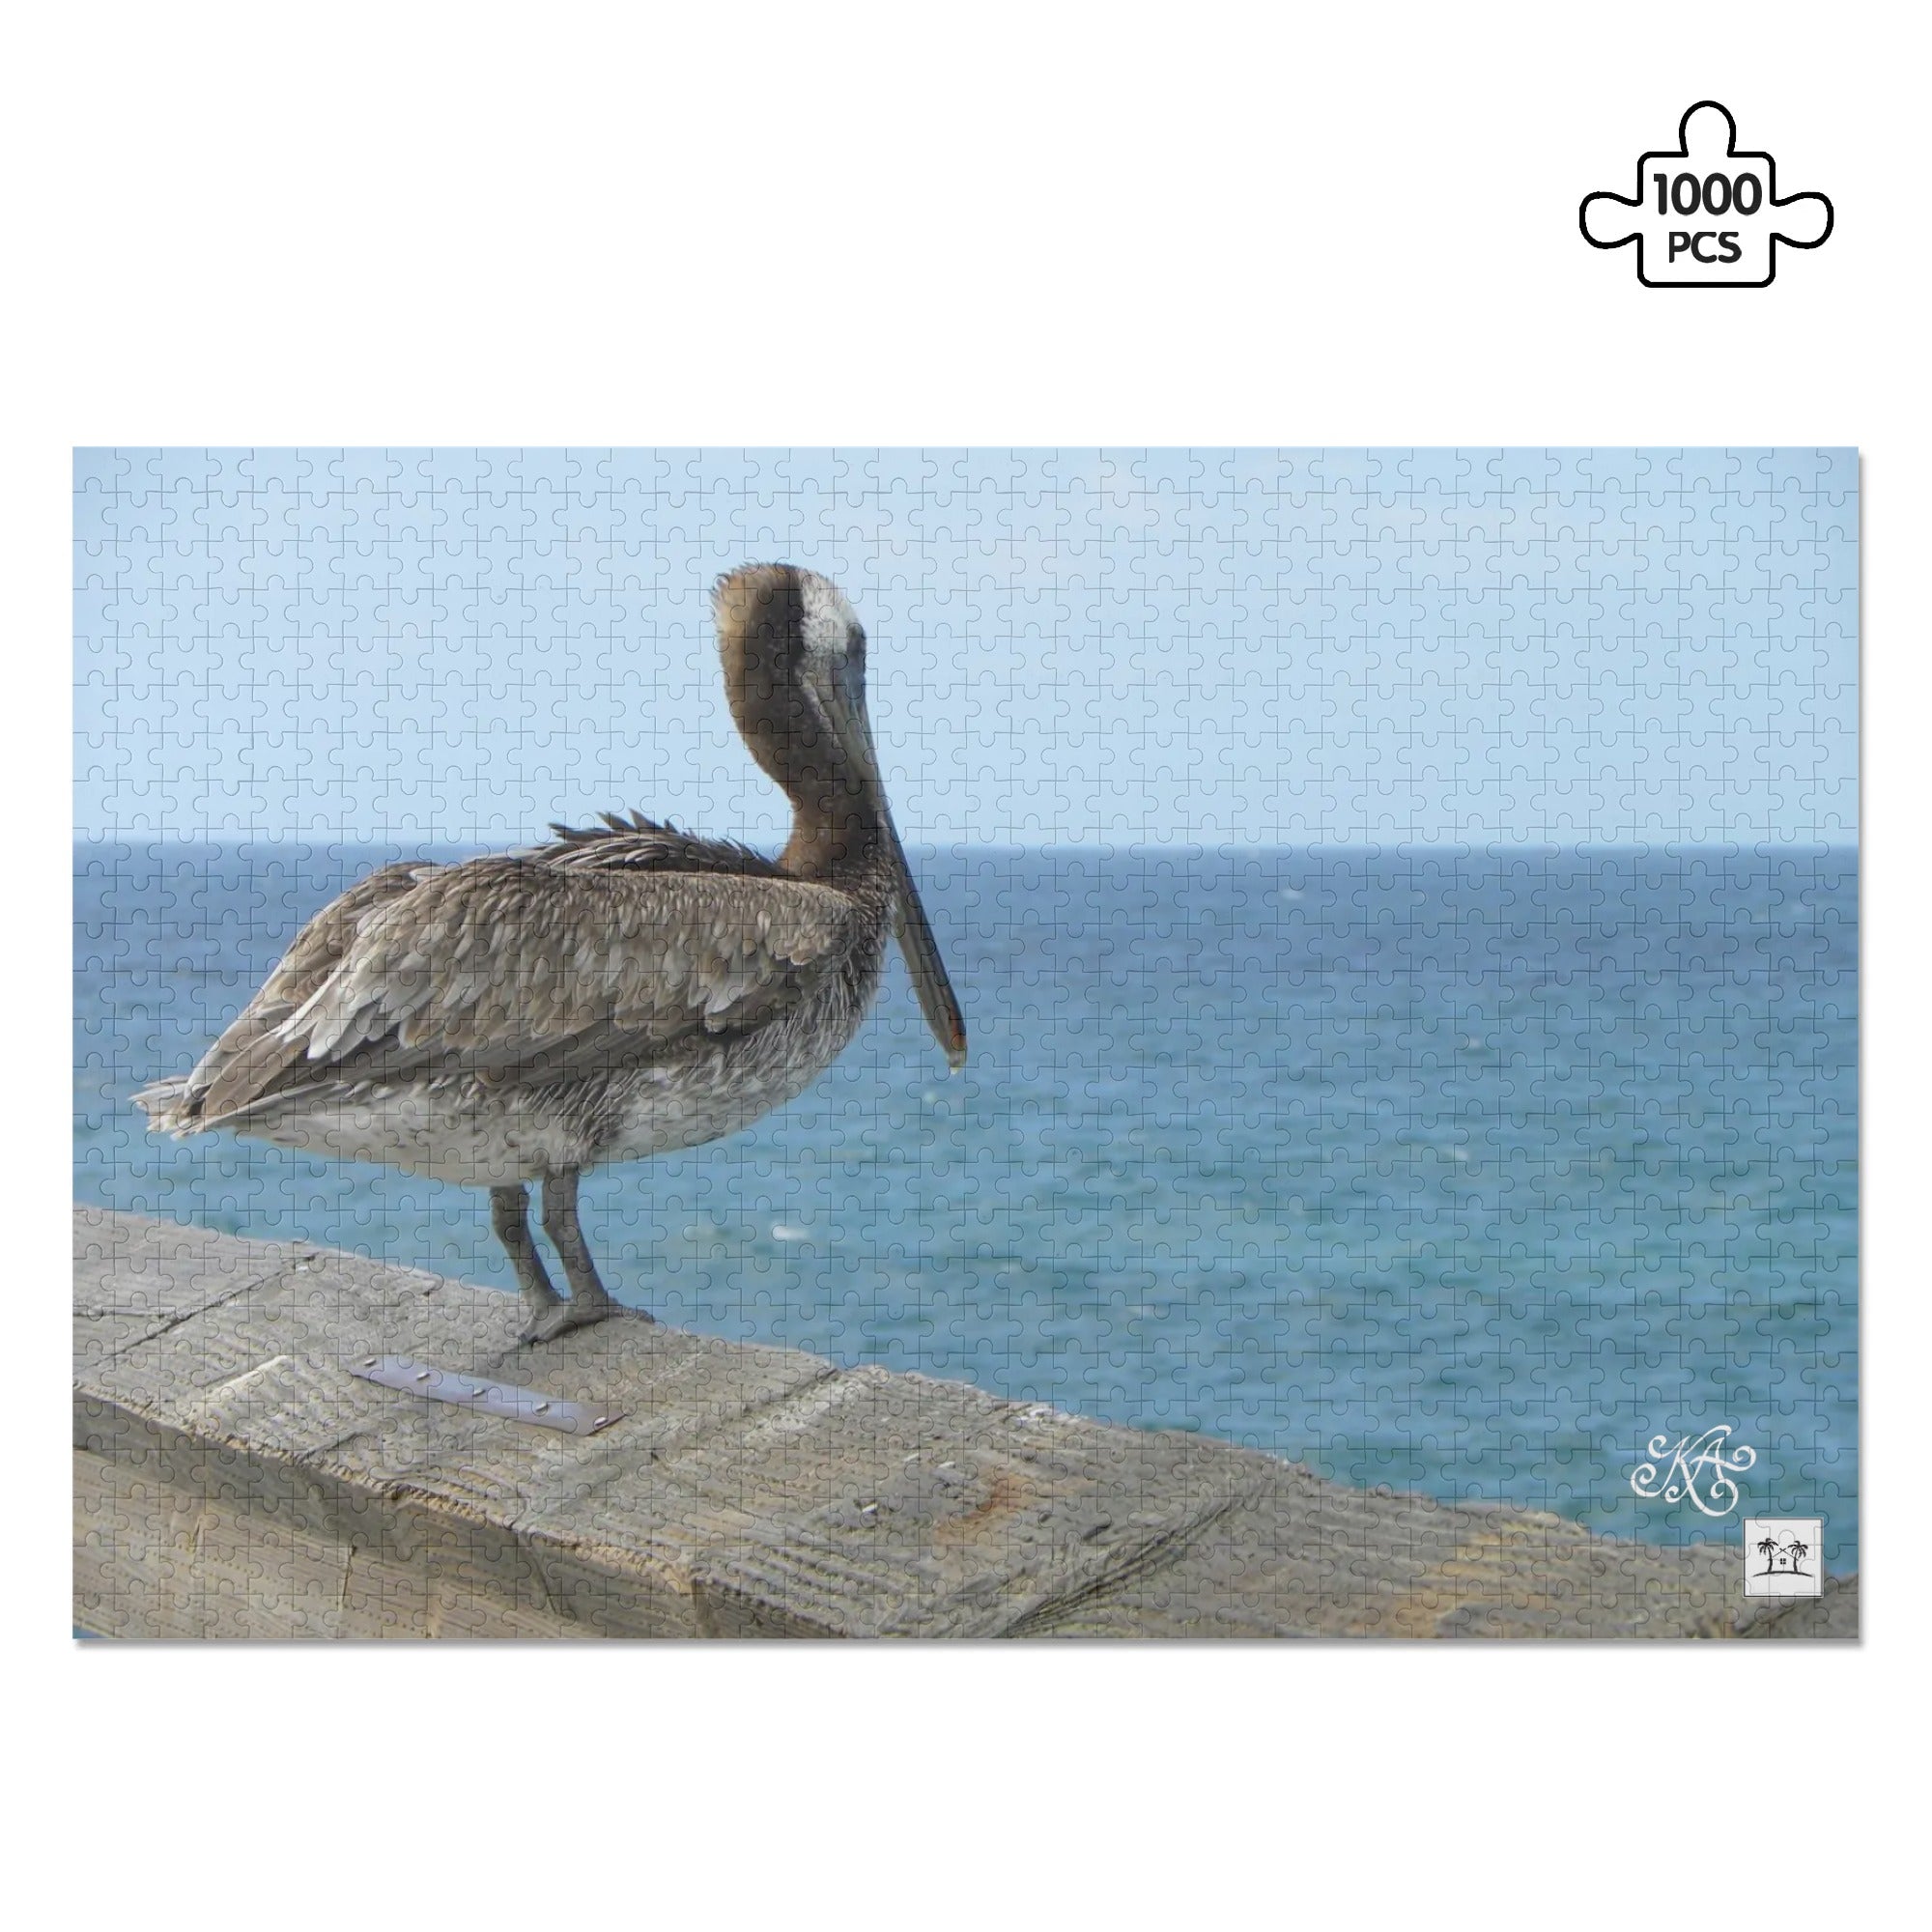 Wooden Jigsaw Puzzle (1000 Pcs) - Lone Pelican